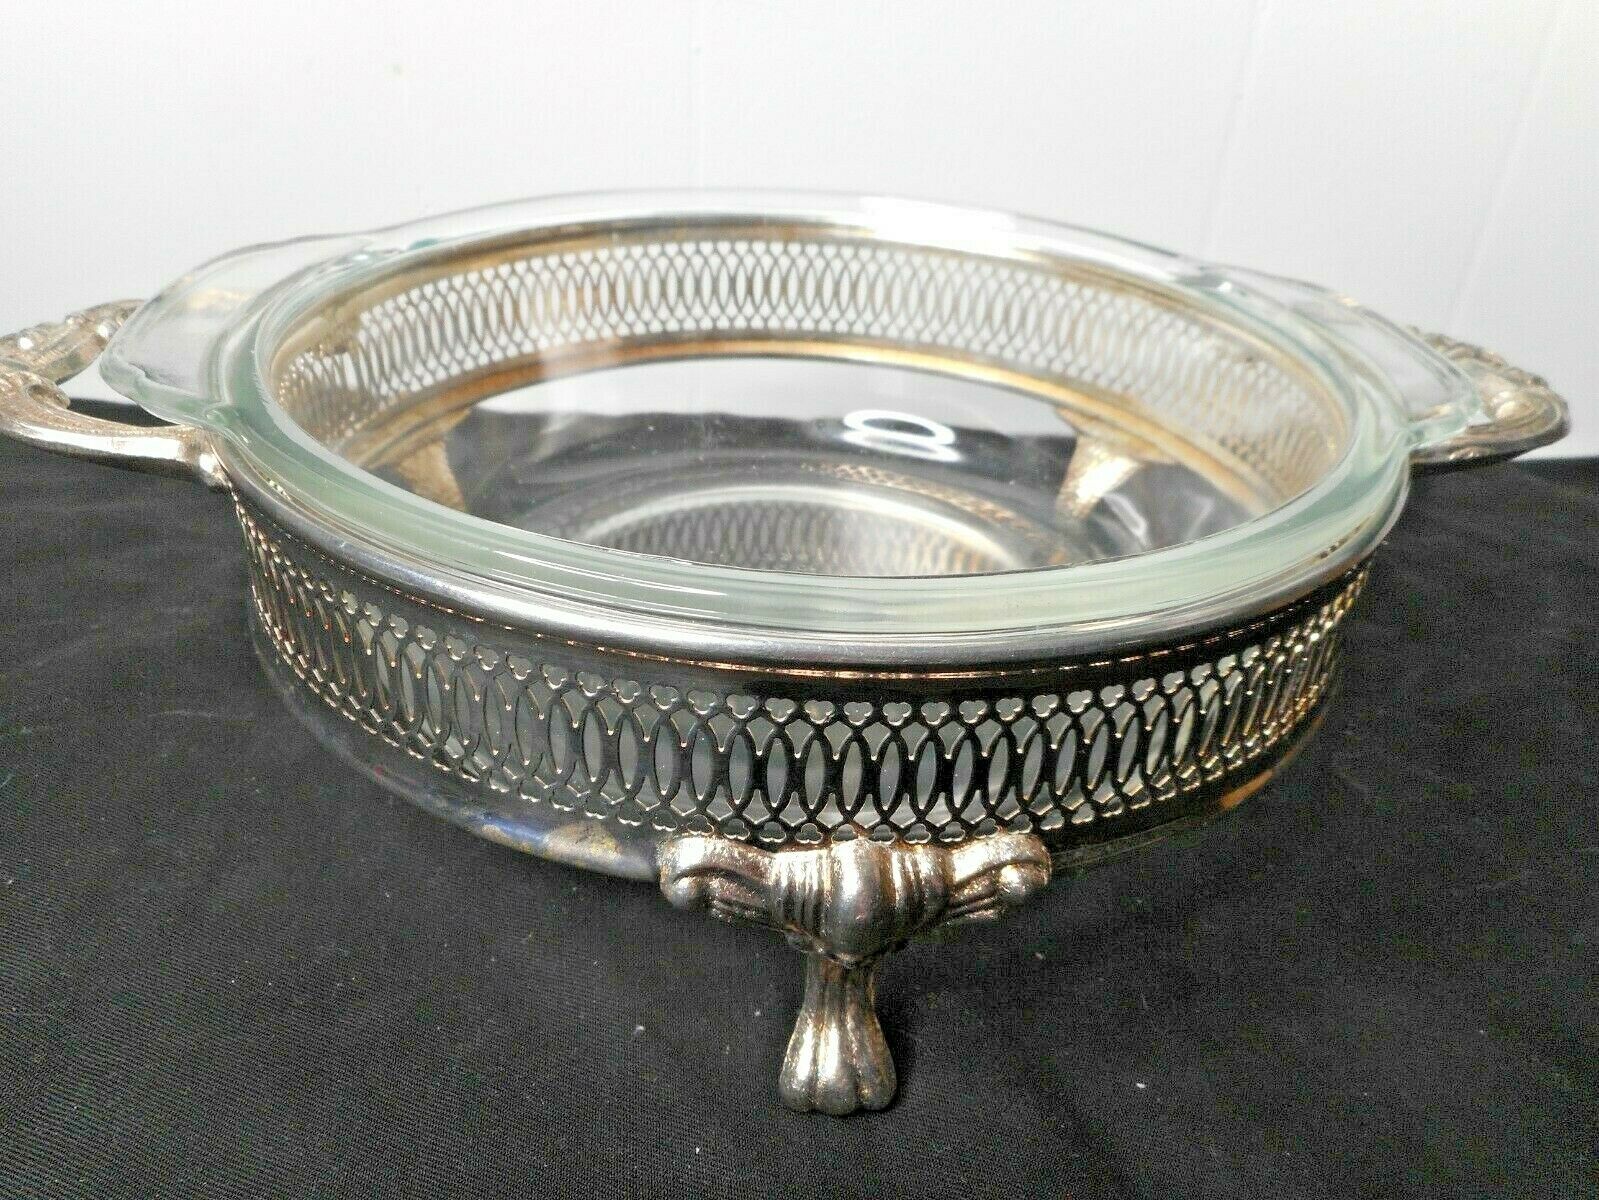 Primary image for Silver Plated Metal Round Casserole Dish Fire King 1 1/2 qt Casserole Dish #447